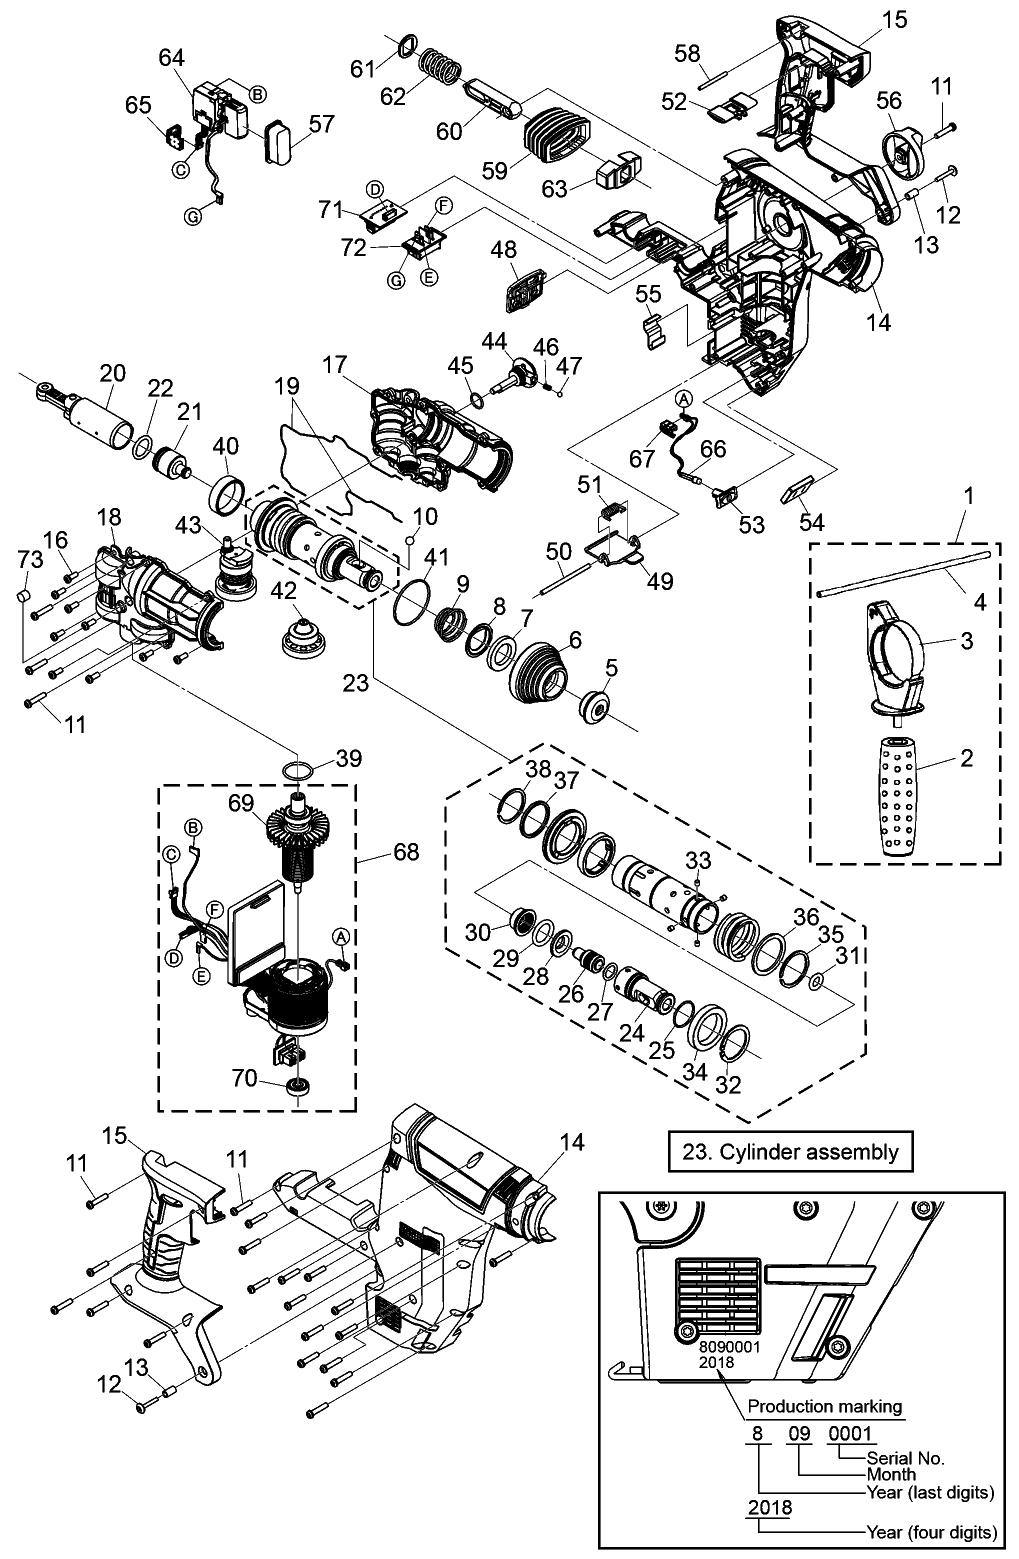 EY7881: Exploded View